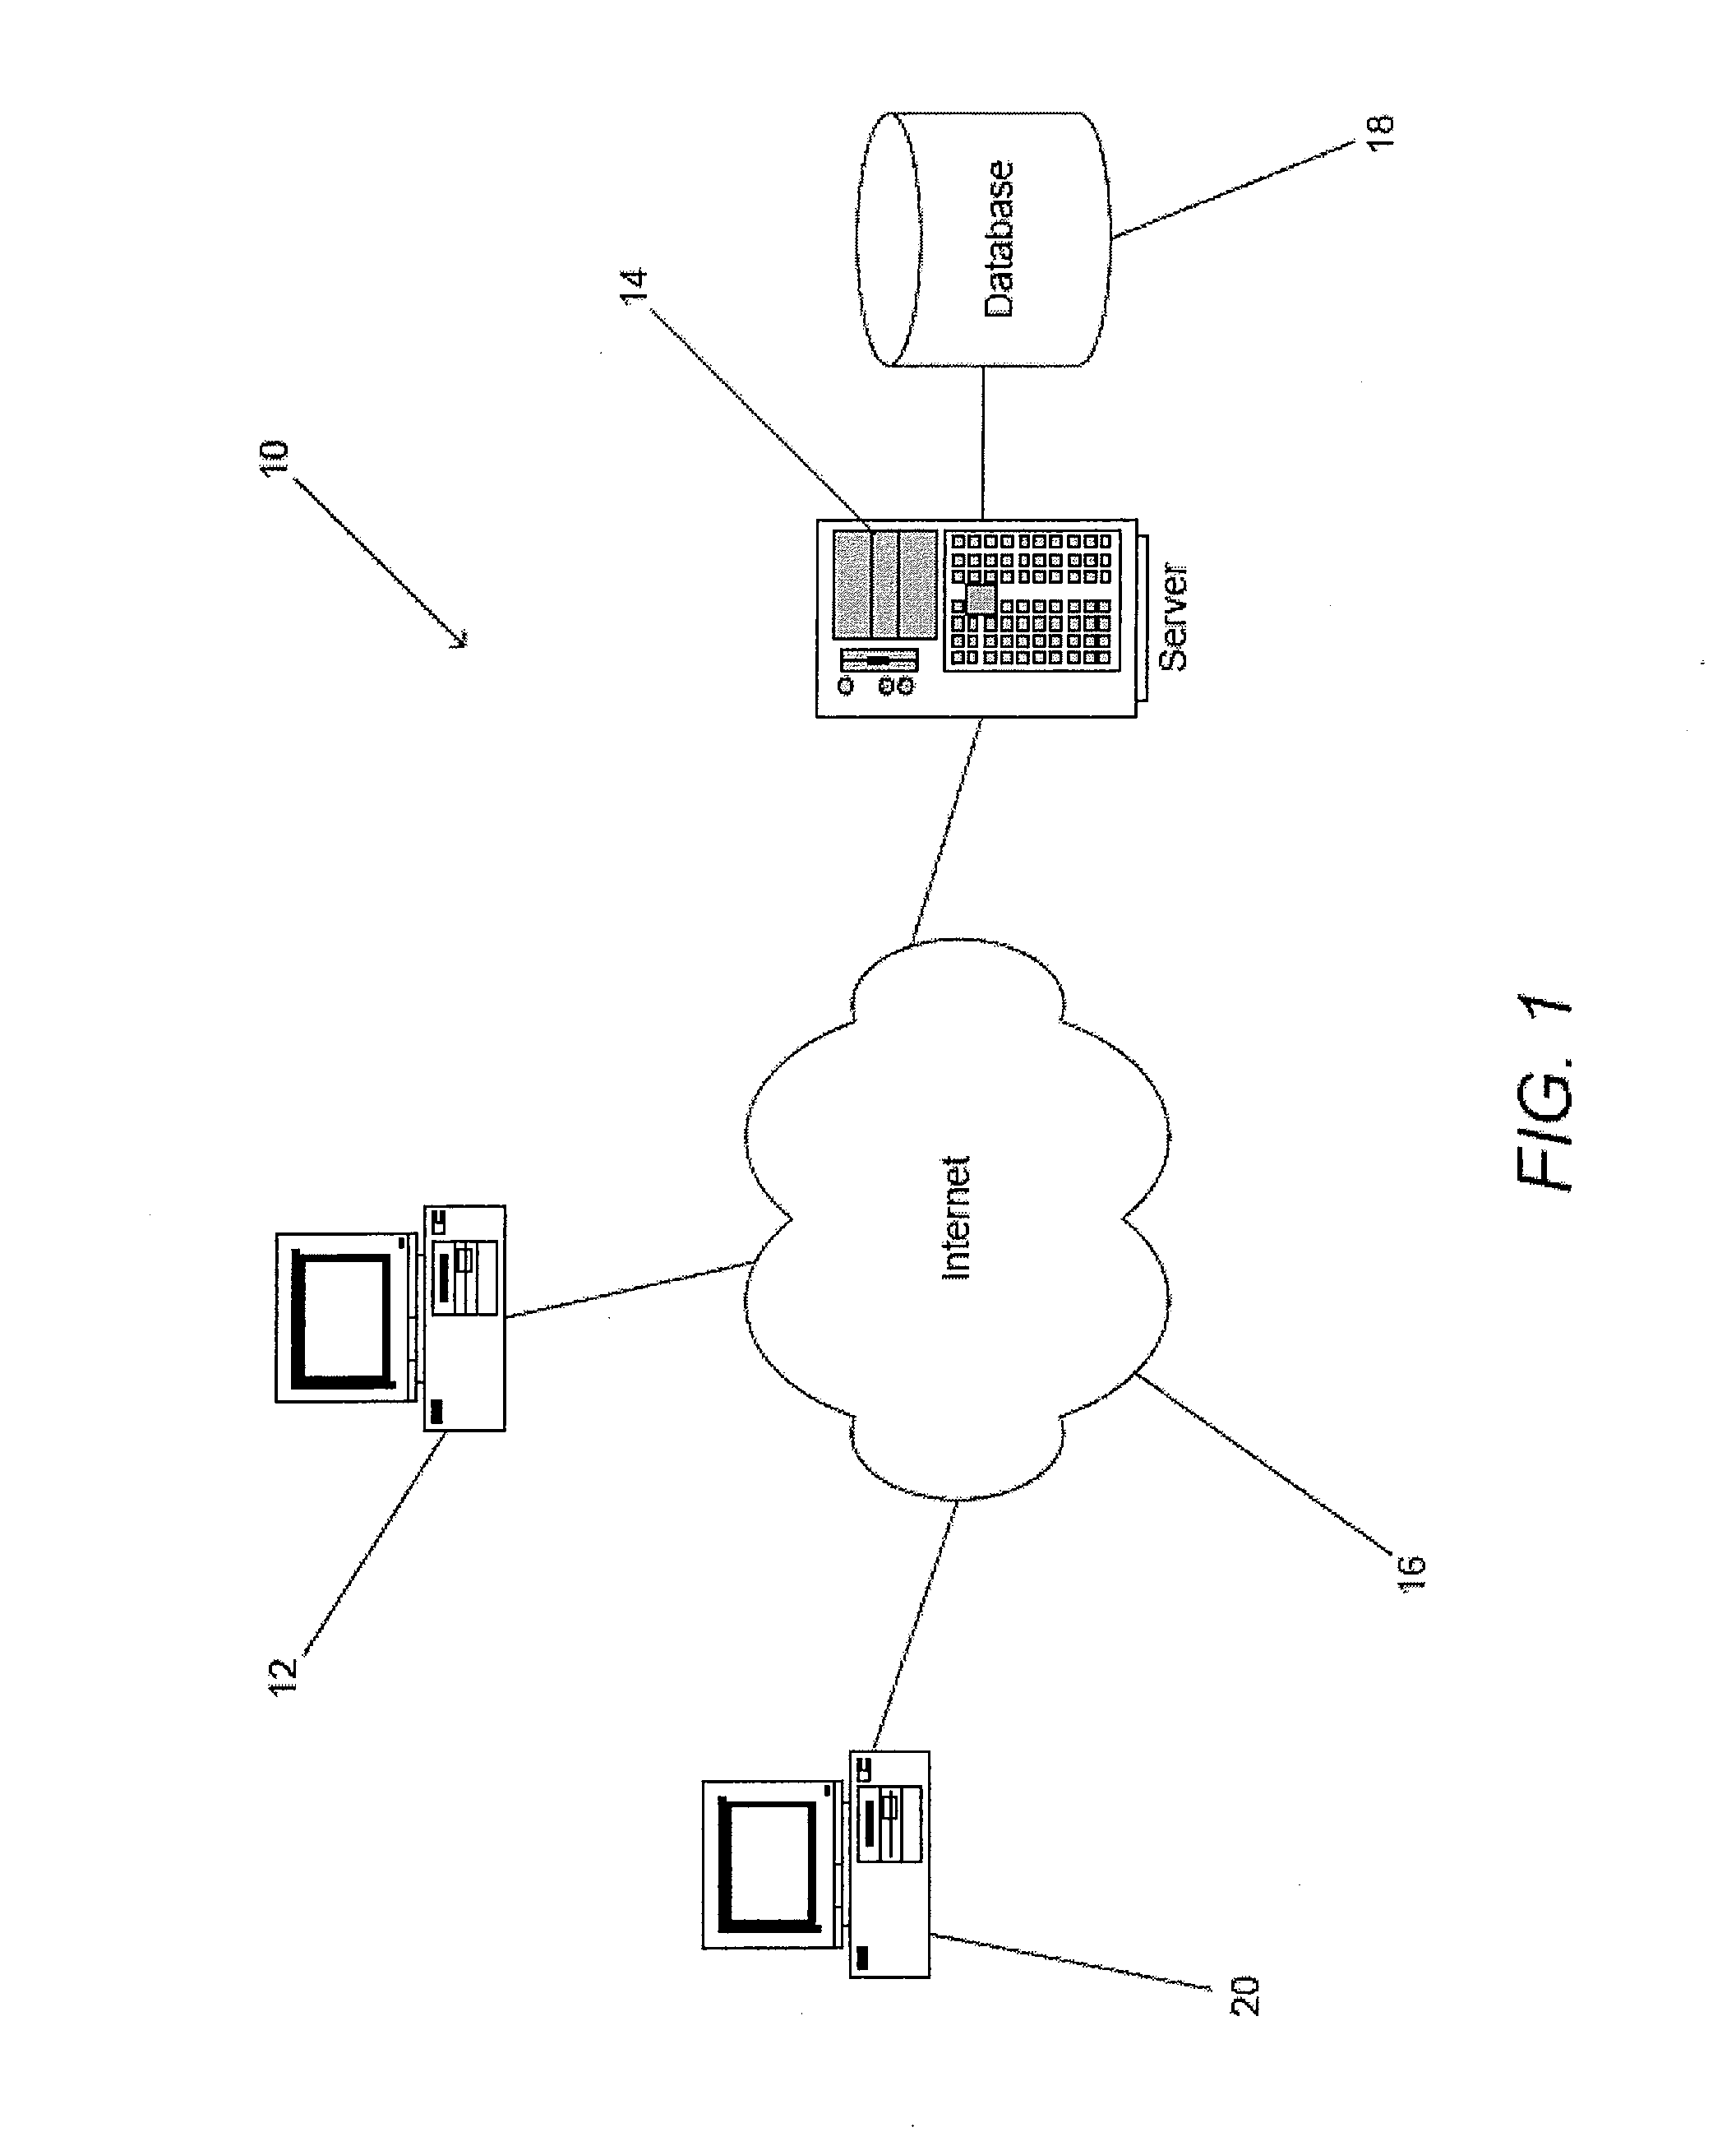 System and method for electronic publication of scientific data and analysis